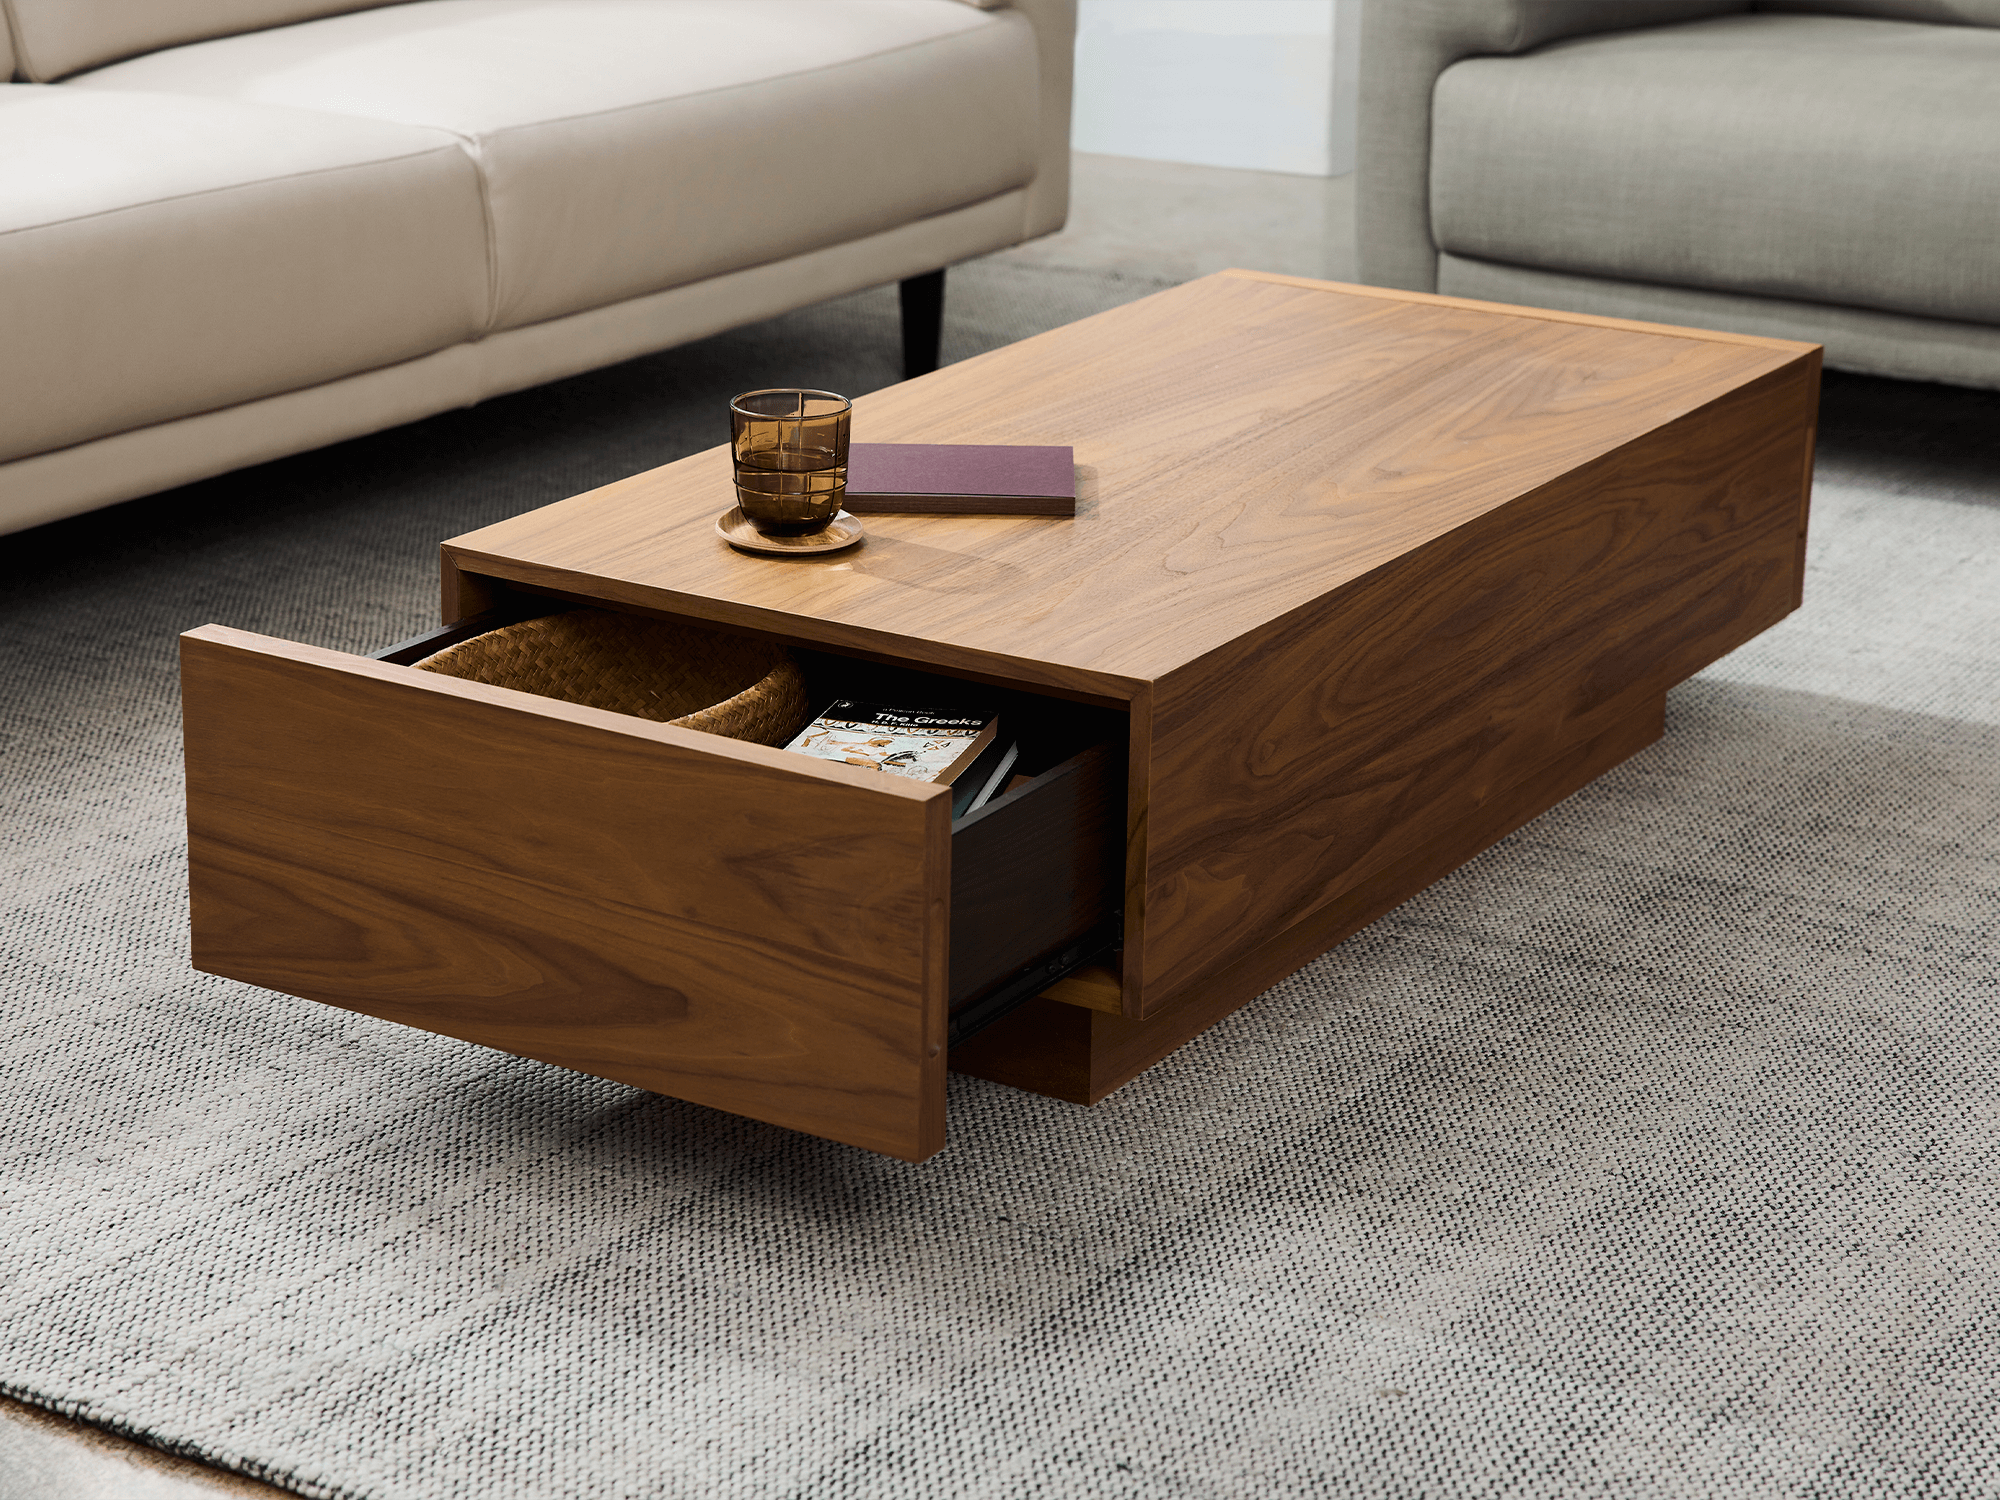 https://images.eq3.com/image-service/19dd000d-498d-4d8a-8735-f3aad2a73508/walnut-coffee-table-with-open-storage-drawer_COMPRESSED.png